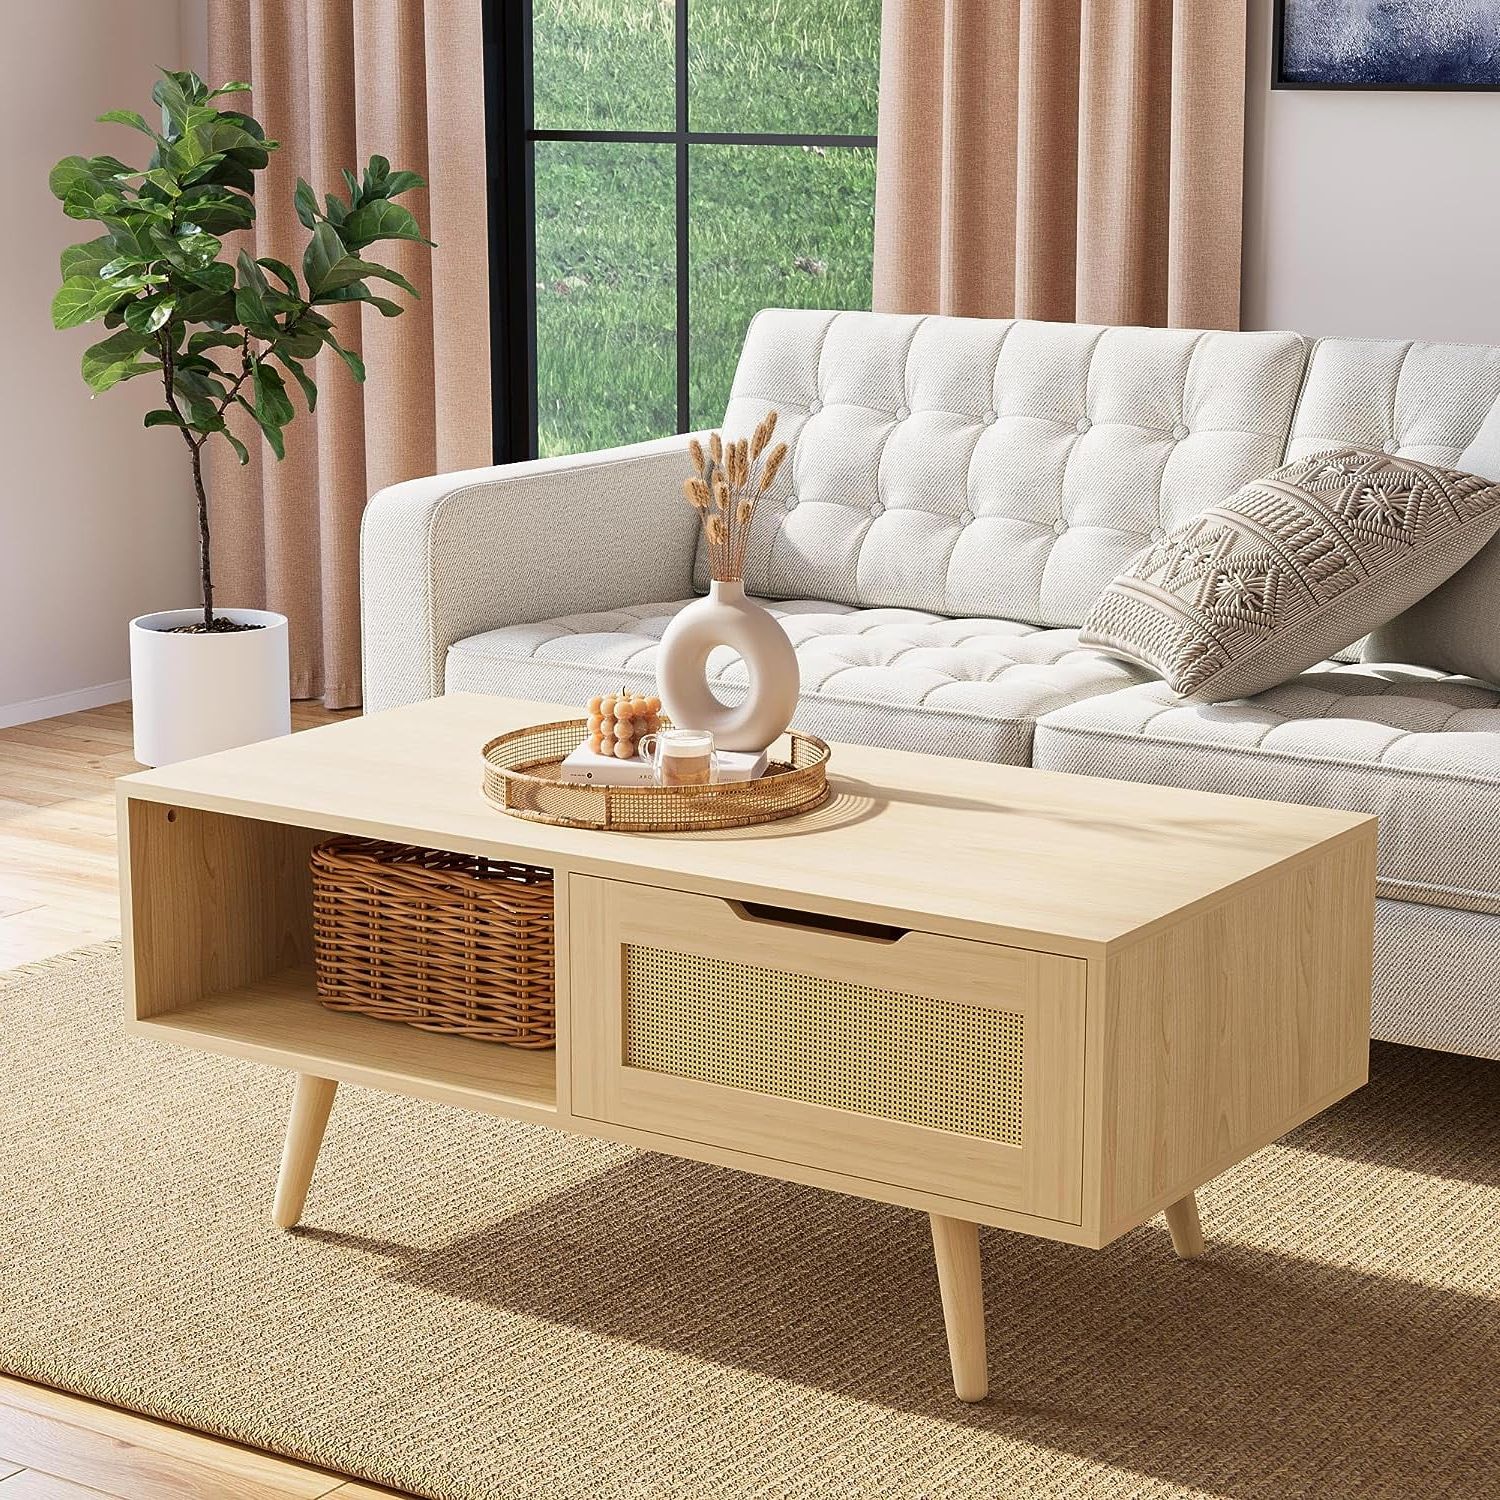 Coffee Tables With Solid Legs With Latest Cozy Castle Boho Coffee Table With Storage, 39'' Rattan Living Room Tables  With Solid Legs, Mid Century Modern Coffee Table For Living Room, Oak –  Walmart (Photo 2 of 10)